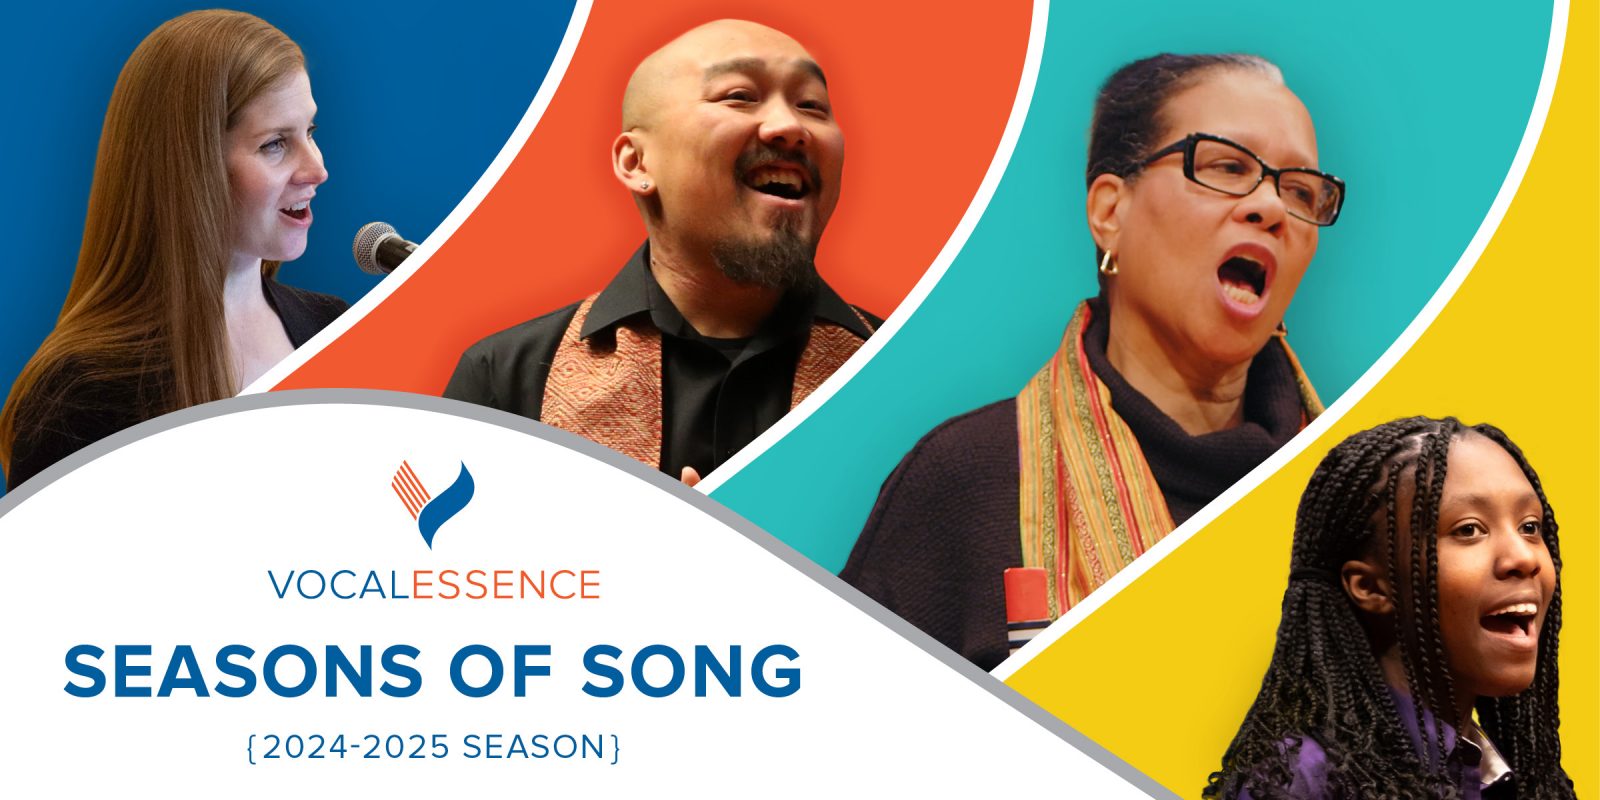 Four different VocalEssence singers, each in a different colored background: dark blue, bright orange, teal, and yellow. VocalEssence logo, "Seasons of Song" and 2024-2025 Season. Design: Lora Joshi, Photo Credit (Singer Images L-R): Bruce Silcox, Kyndell Harkness, Blue Key Media, and Anna Min